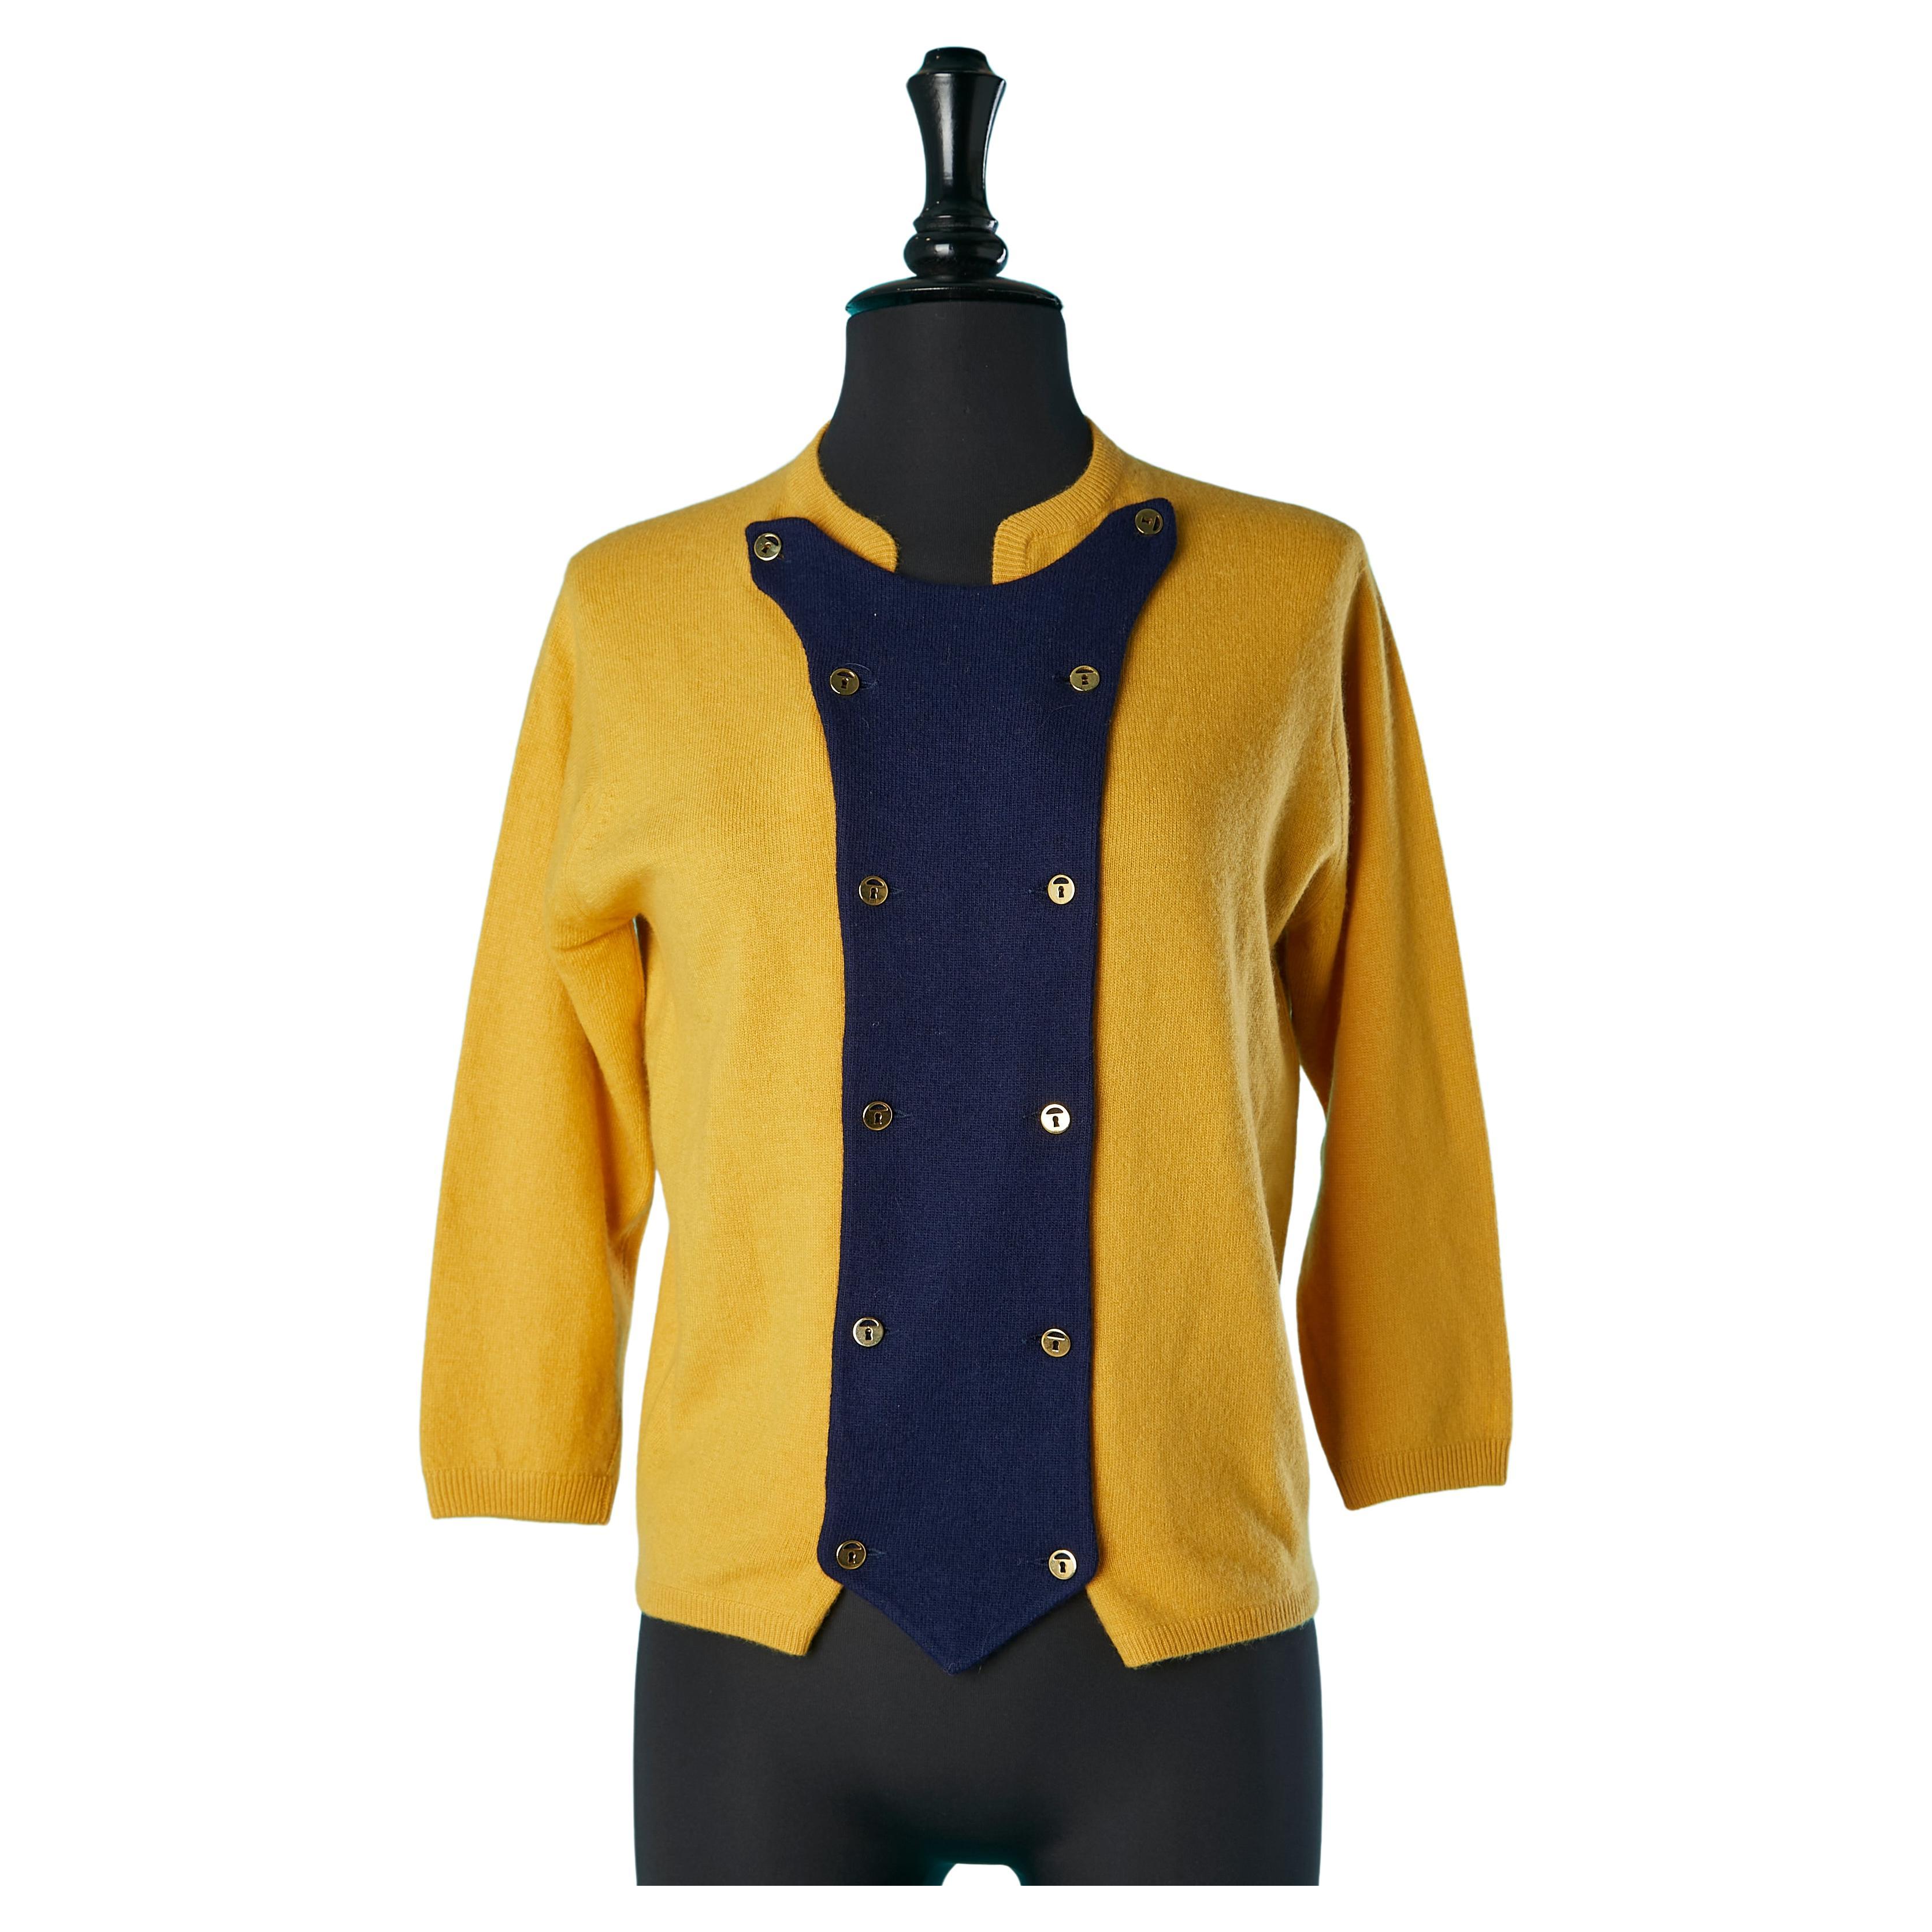 Mustard and navy cashmere knit Trompe-l'oeil cardigan Roberta by R. Di Camarino For Sale